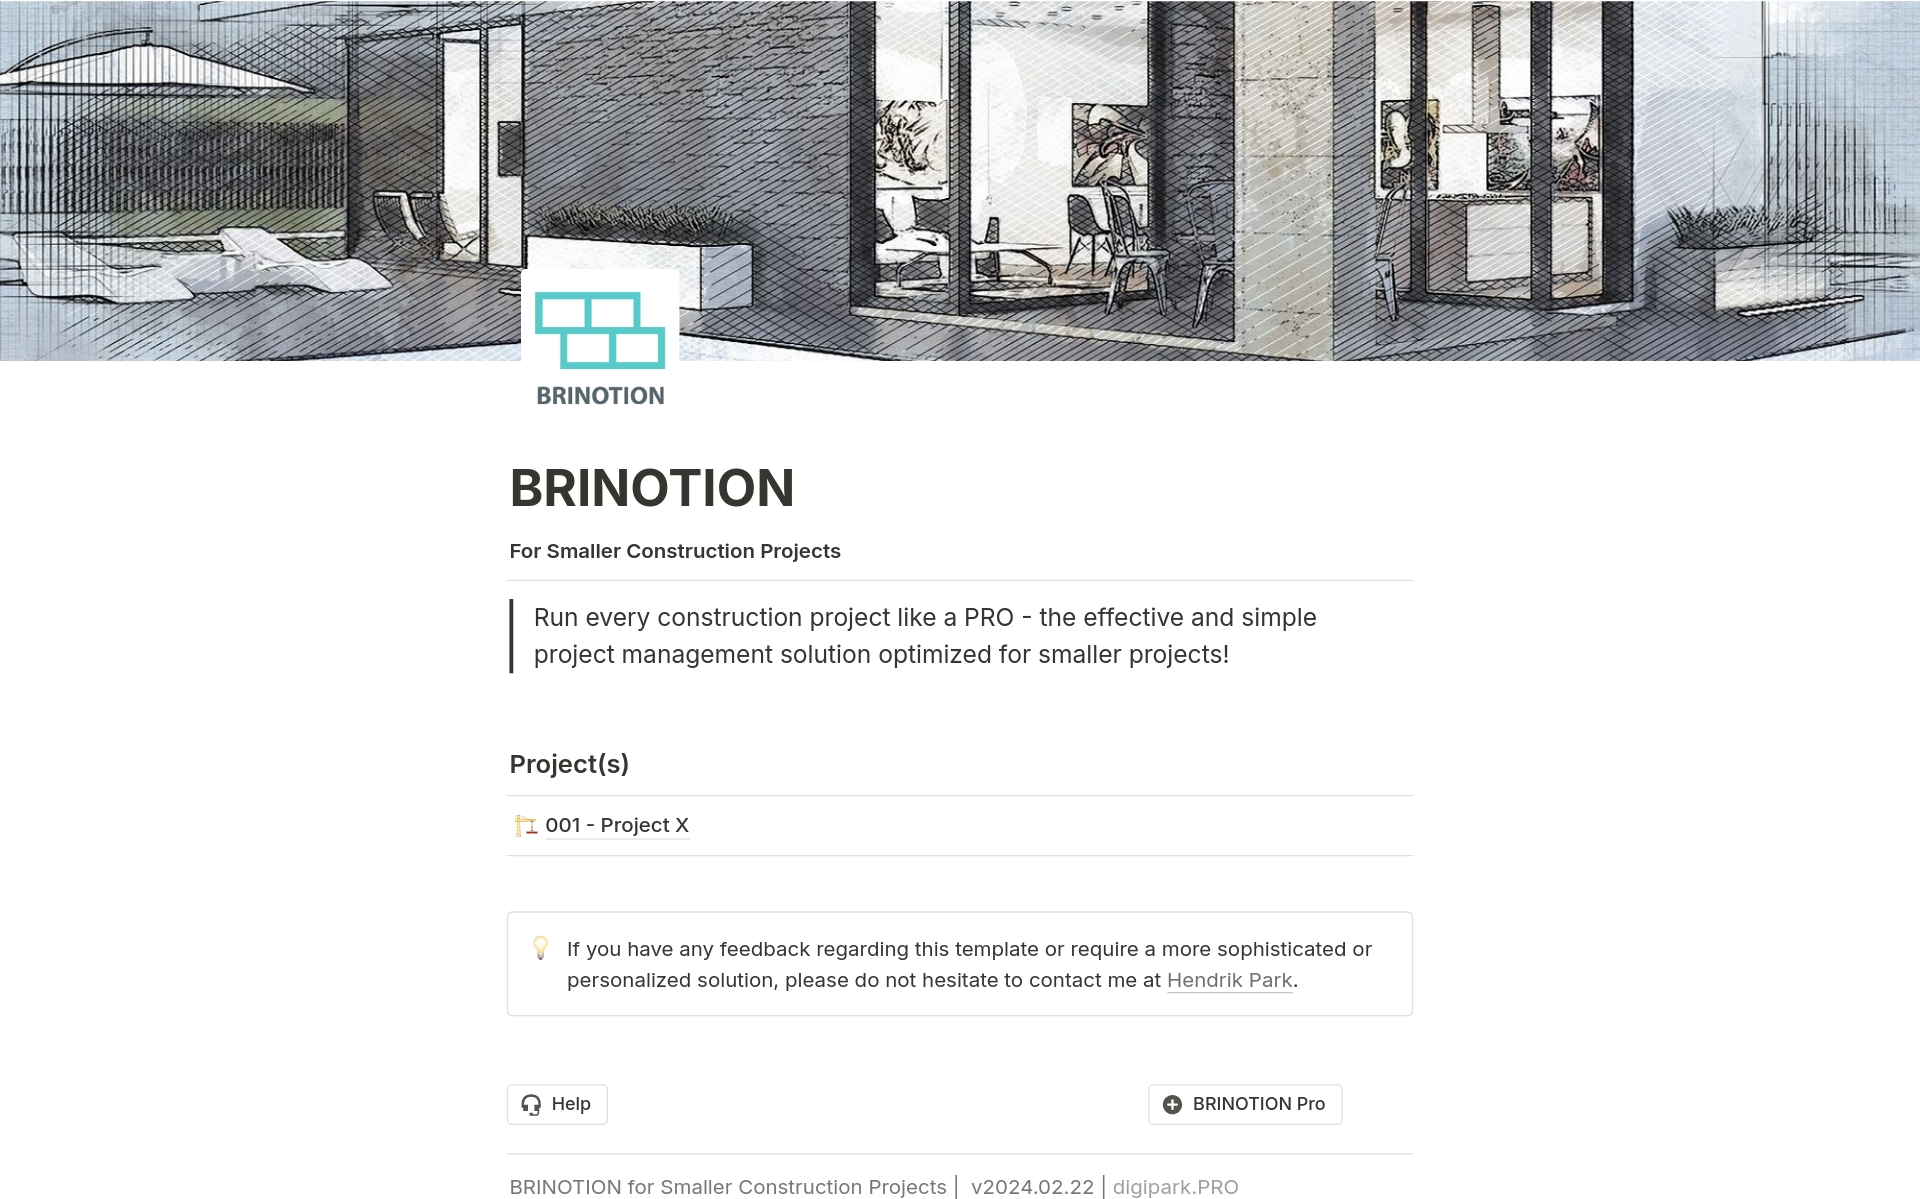 BRINOTION is a project management tool for the construction industry that simplifies core activities, saving time and effort. It's perfect for professionals seeking improved oversight and collaboration, offering efficiency with simplicity, designed by a civil engineer.